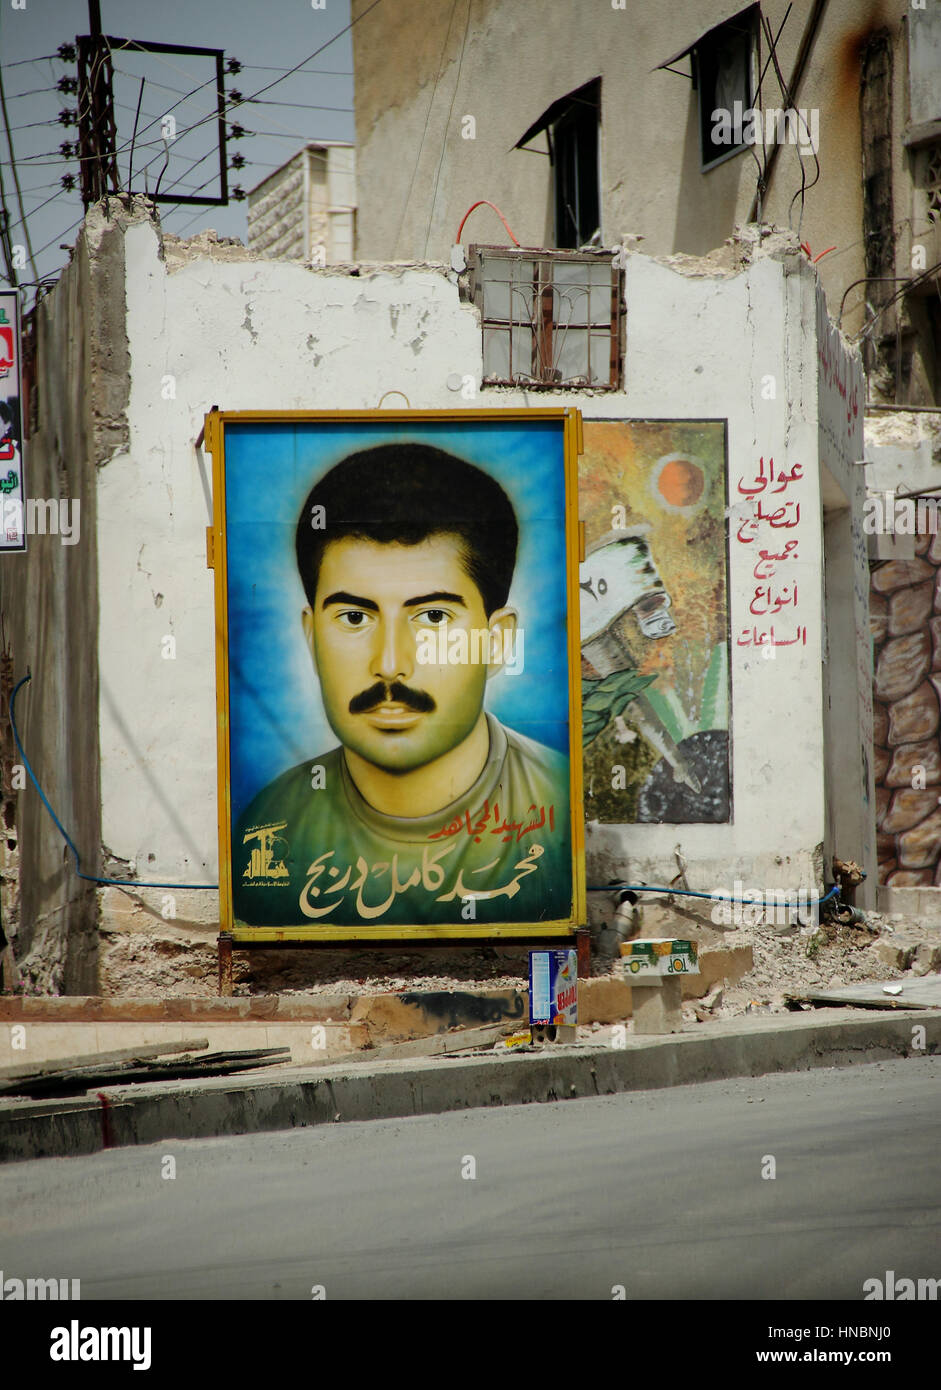 A billboard depicts a martyr from the 2006 war with Israel in the south of Lebanon, near Tyre. The symbol on the bottom left indicates his association Stock Photo